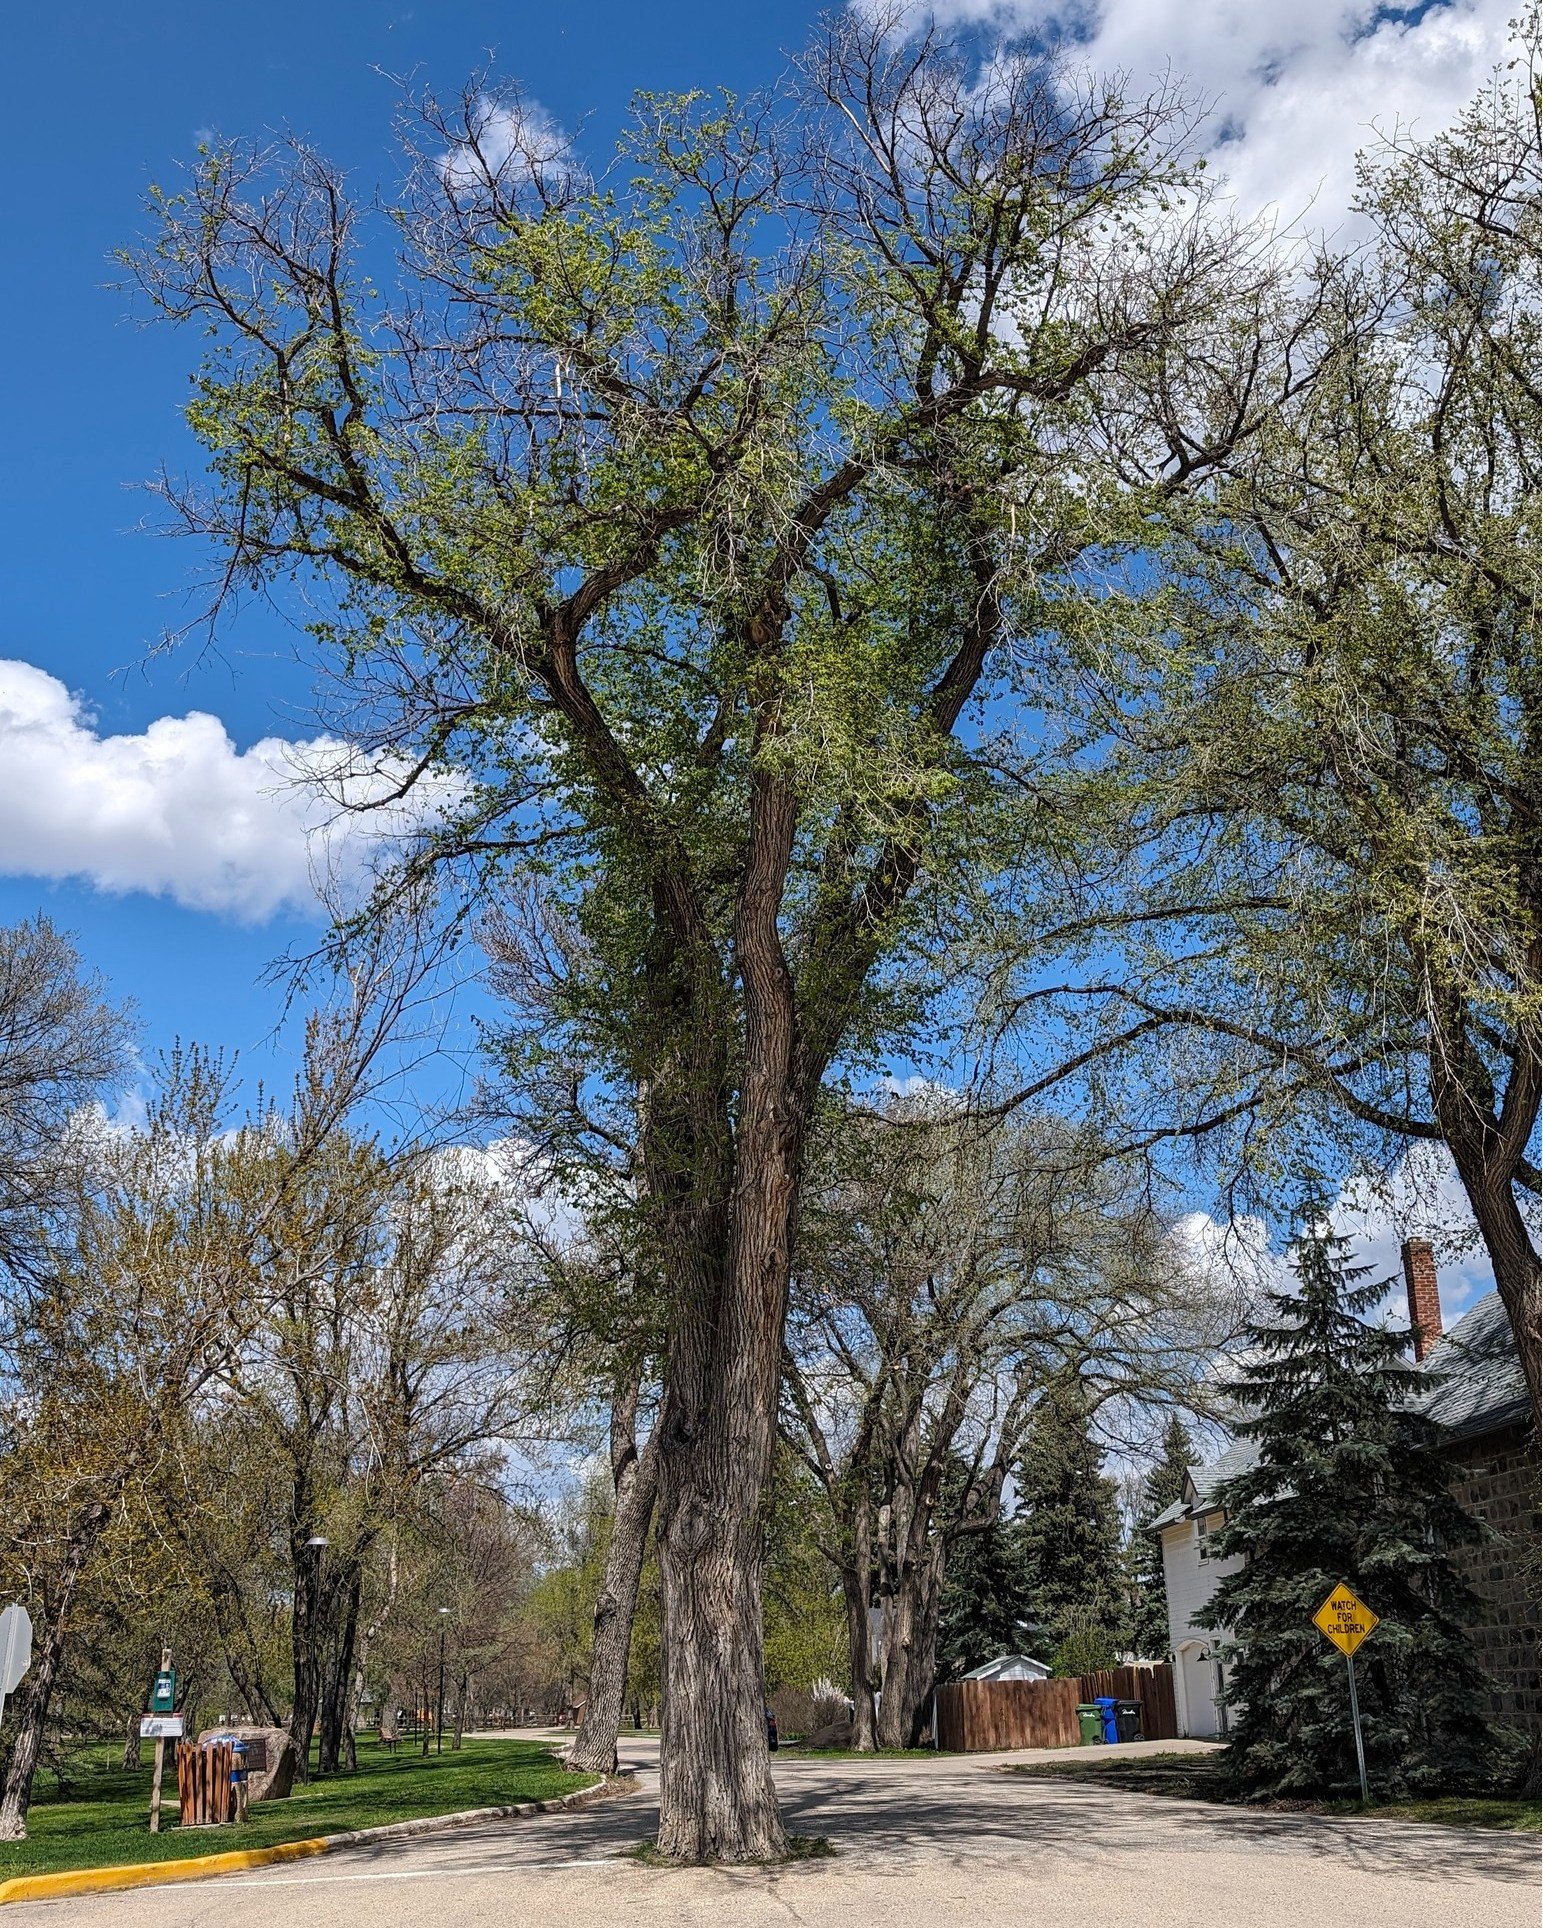 🌳🚧 Conservation Efforts Begin on Elm Tree at Morden Park 🚧🌳

Maintenance and conservation work on the American elm tree at the main entrance of Morden Park off 13th Street and Thornhill Street is scheduled to commence shortly. 

The tree, a known